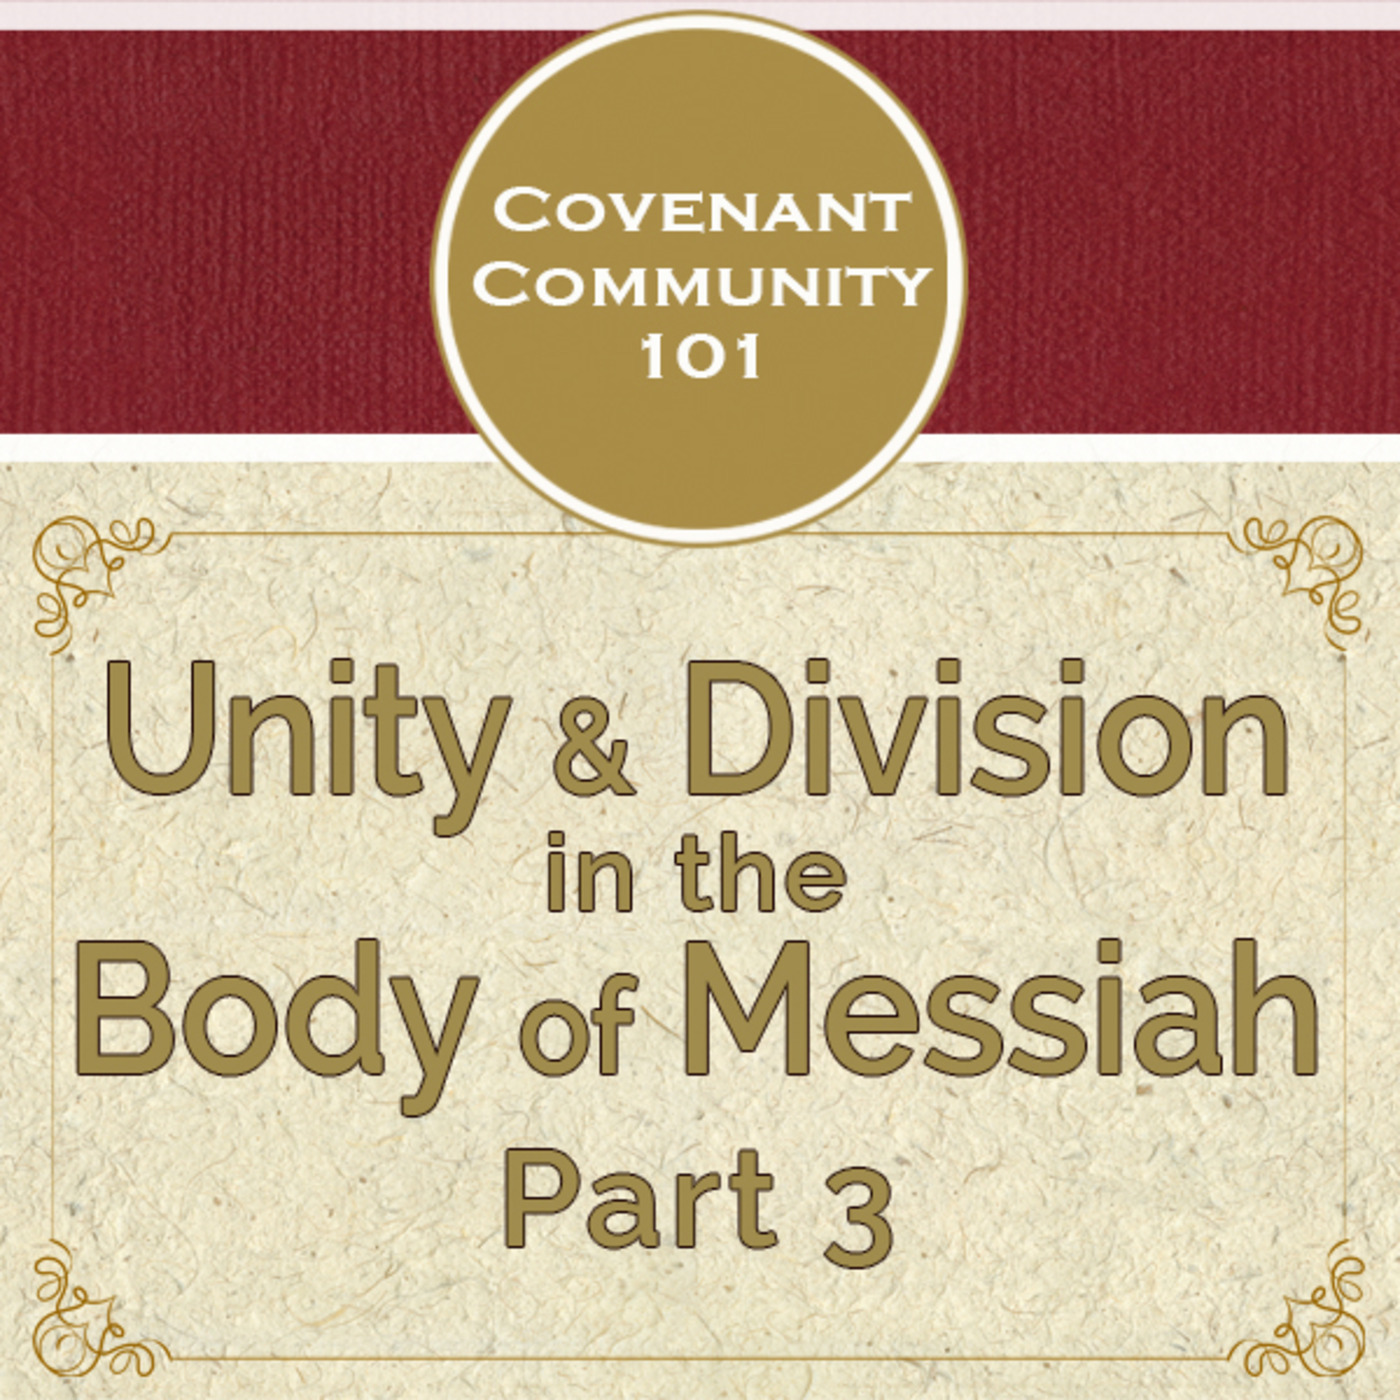 Covenant Community 101: Unity & Division in the Body of Messiah - Part 3